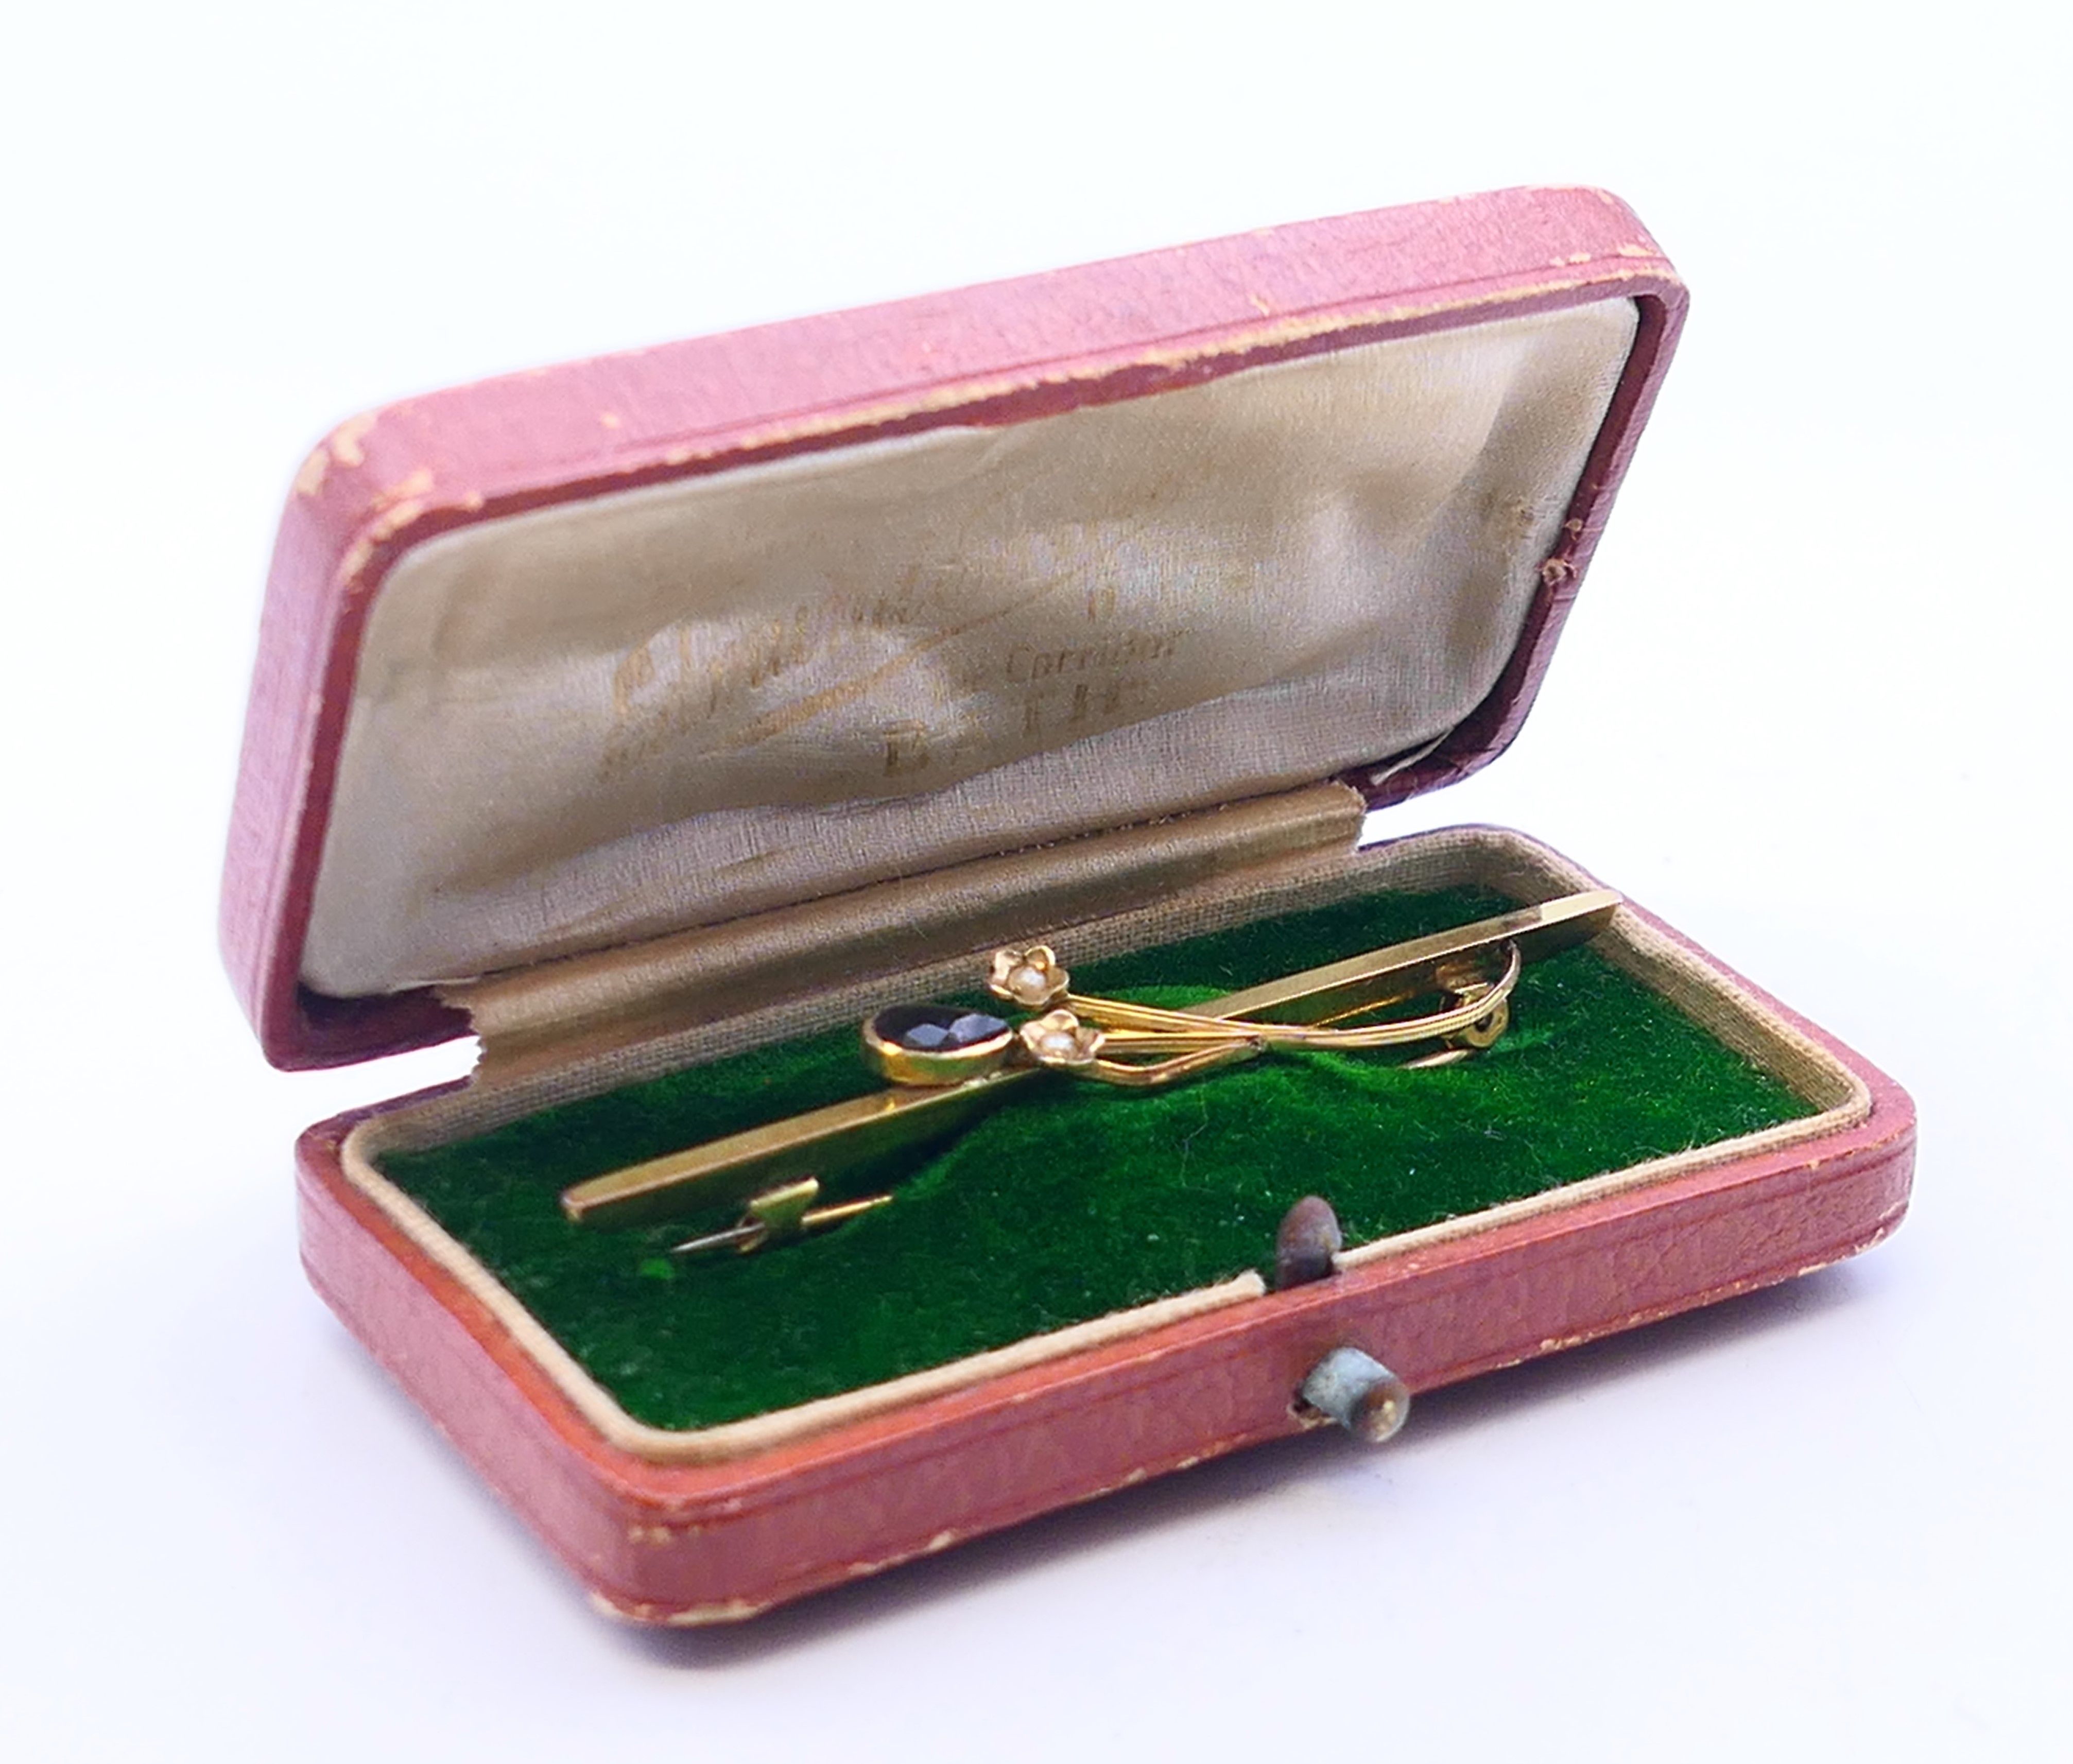 Three 9 ct gold brooches, one with pearls set within a 'D', all boxed. The largest 6 cm long. 5. - Image 14 of 14